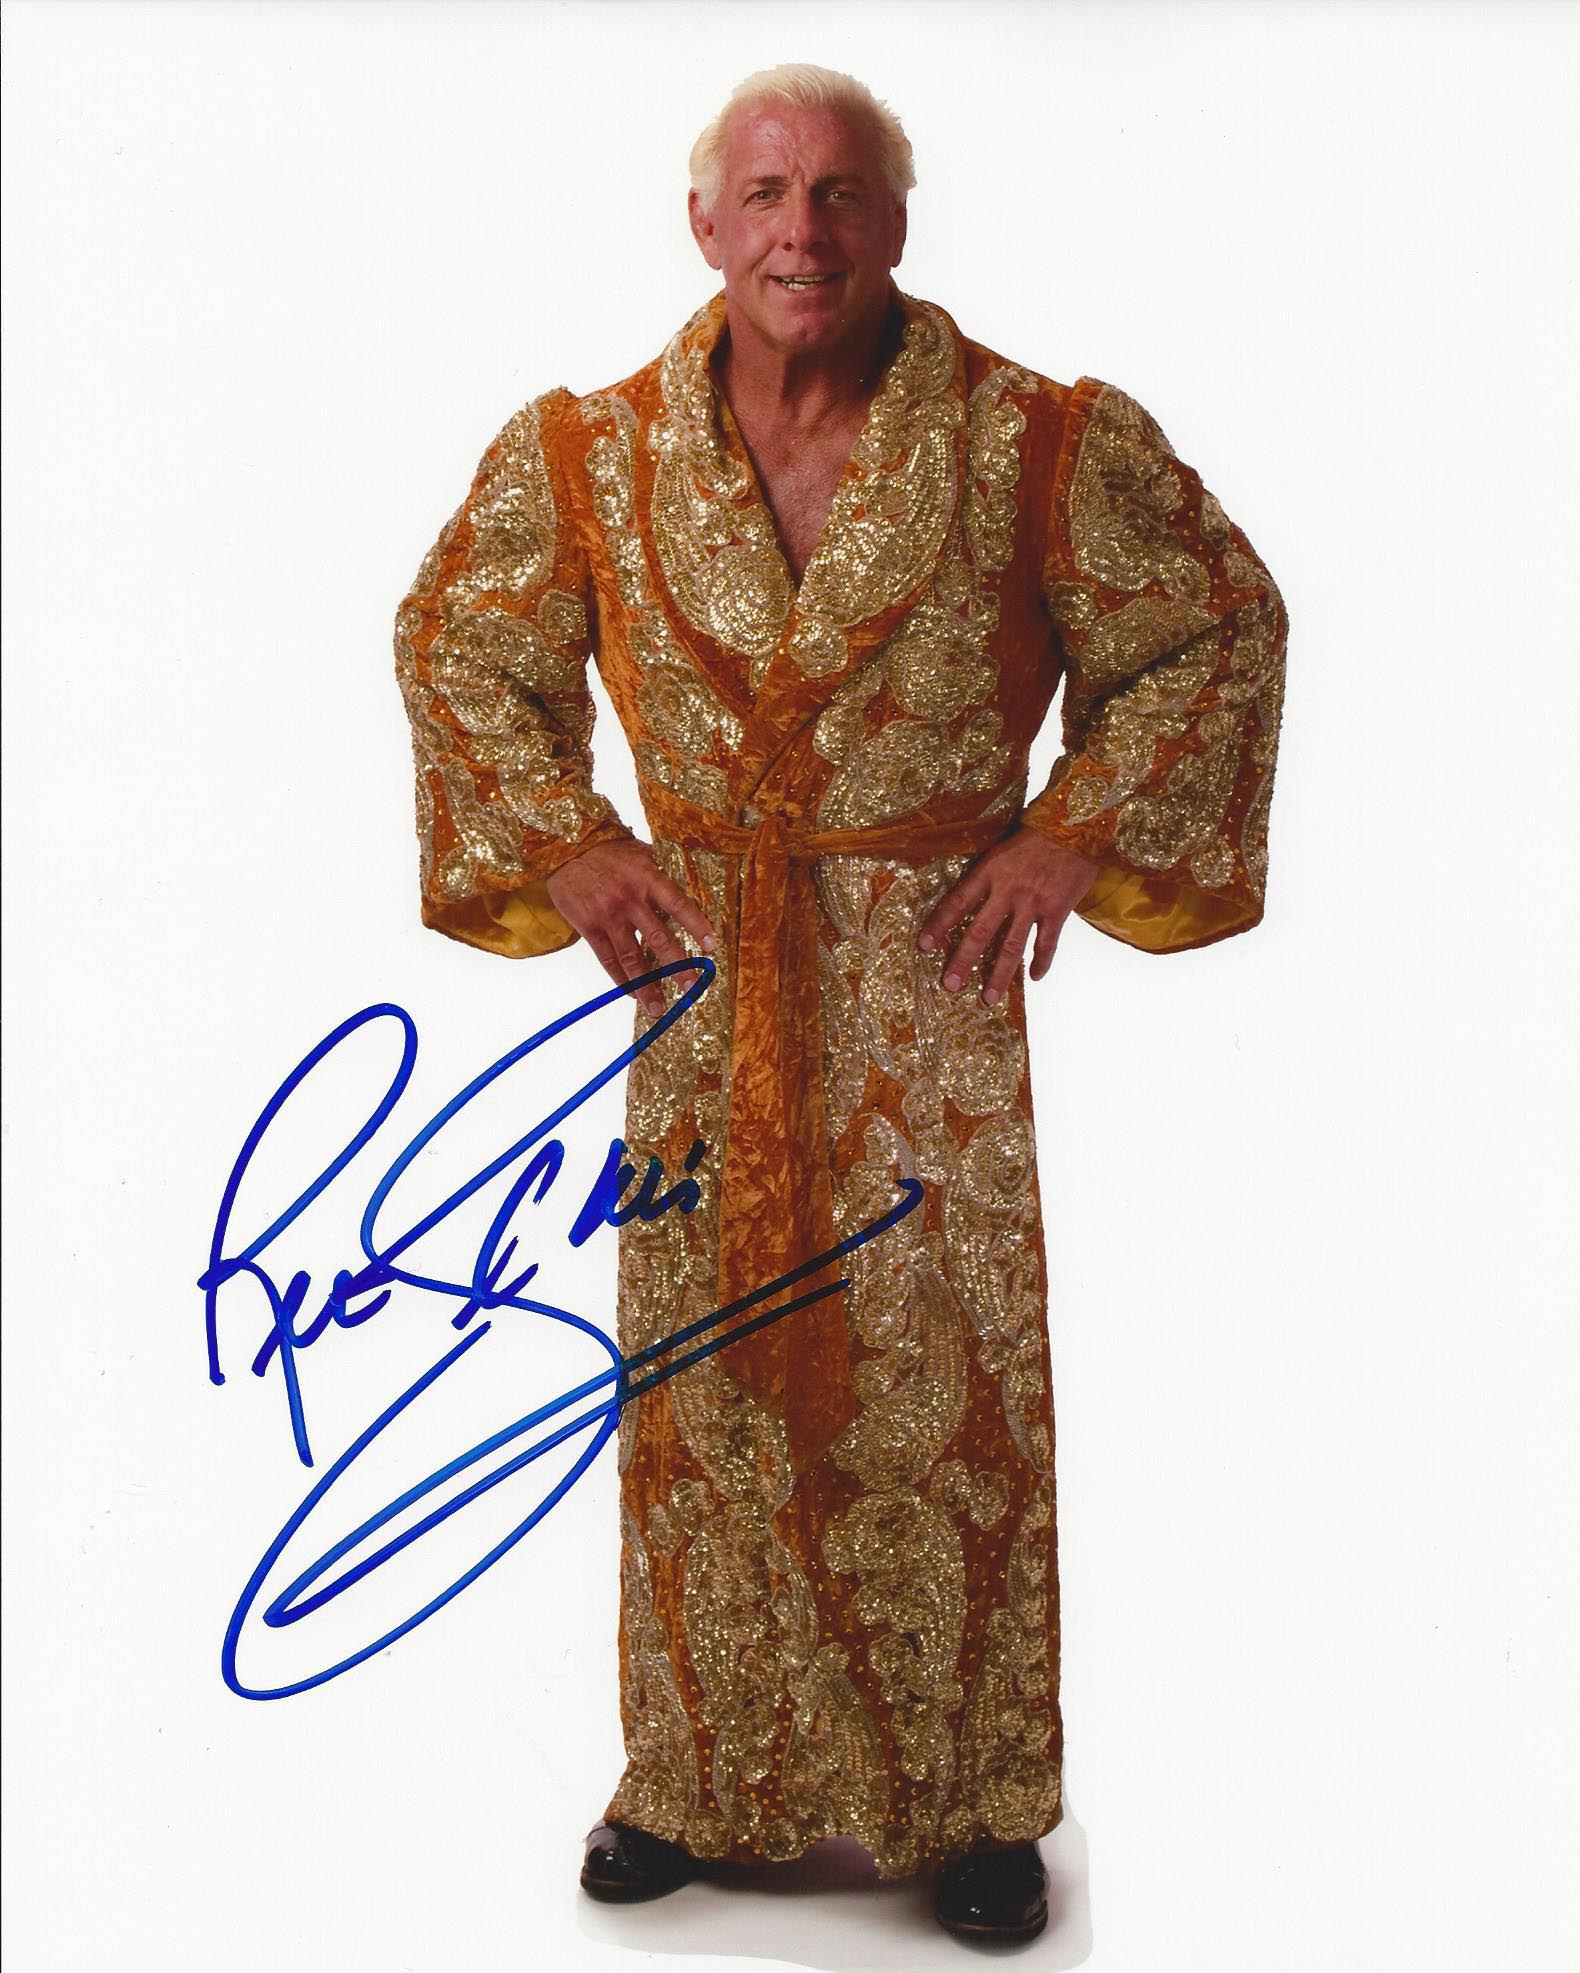 RIC FLAIR PHOTO WWE 8x10" OFFICIAL WRESTLING PROMO NATURE BOY 